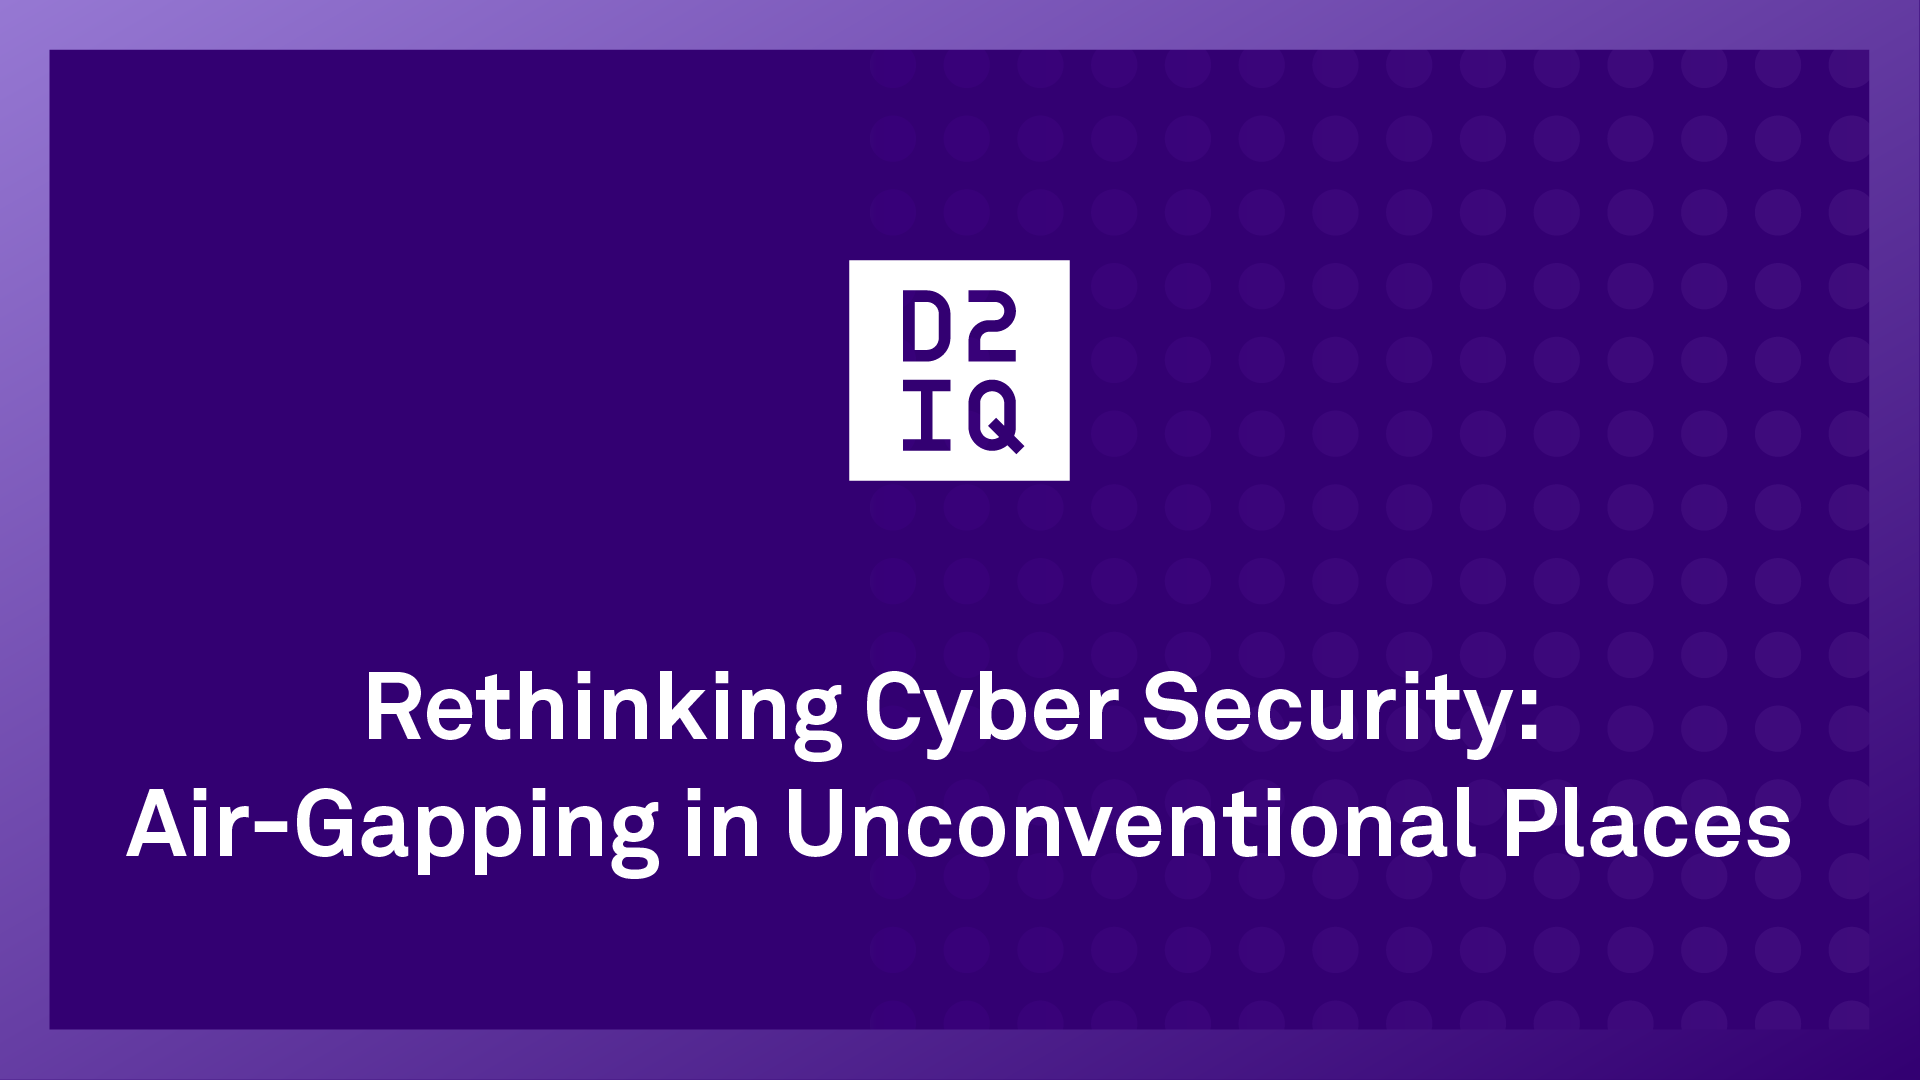 Rethinking Cyber Security: Air-Gapping in Unconventional Places